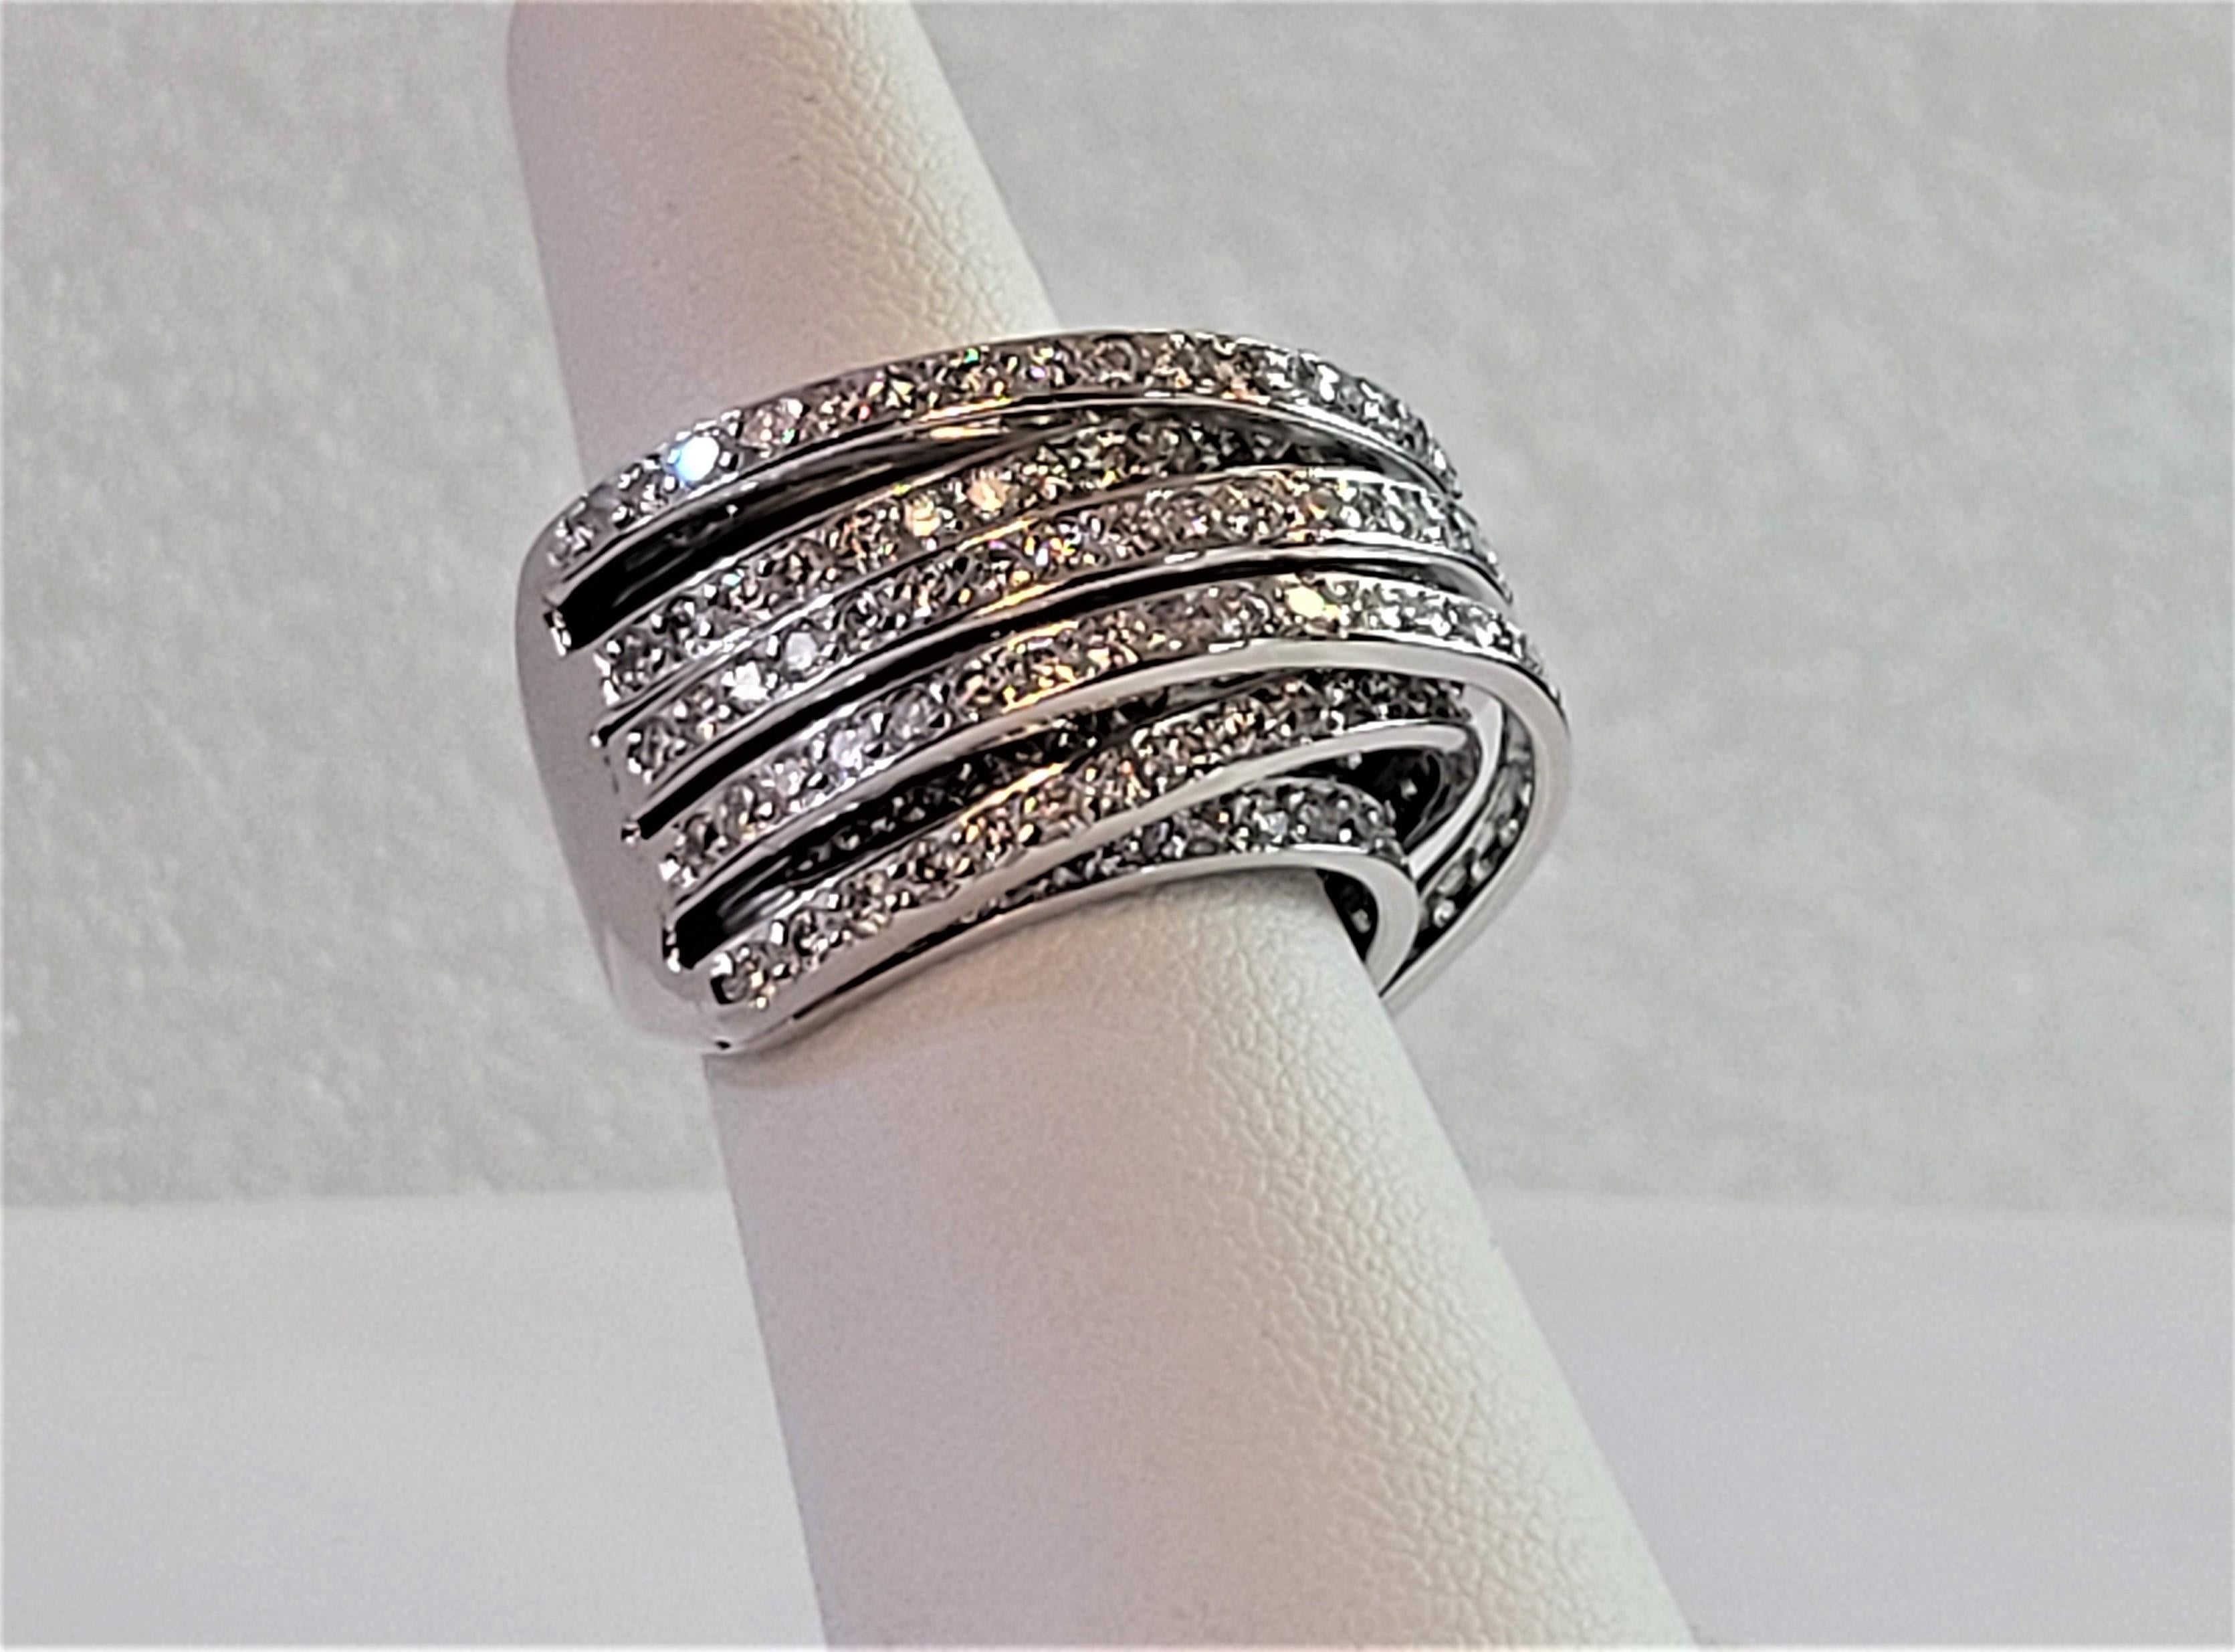 Hand-Made Diamond Ring
Material 18K White Gold
Ring Size 7
Diamonds 4.90ctw 
Dia Clarity VVS
Color Grade F
Ring Weight 20.8gr
Gender Unisex  
Condition New, never worn
Retail Price$ 15000